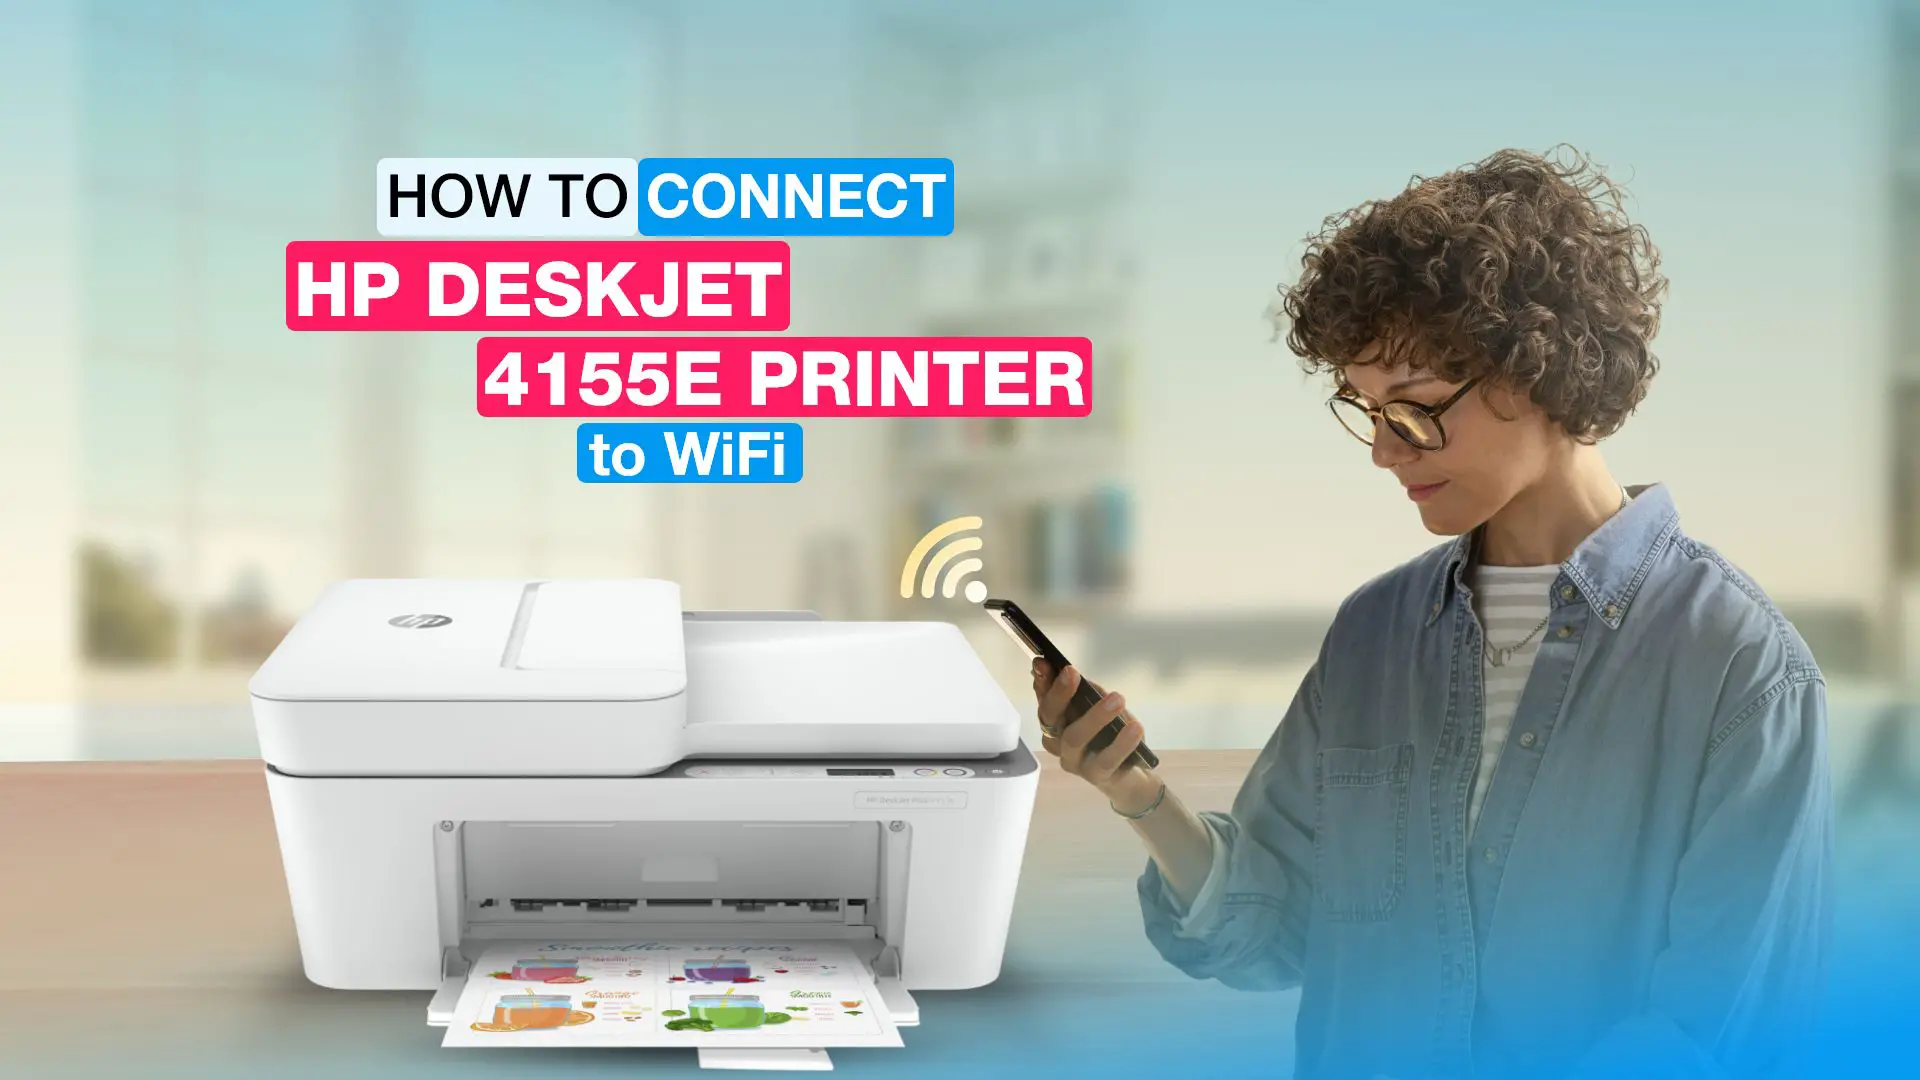 How to Connect HP DeskJet 4155e Printer to WiFi – Full Guide